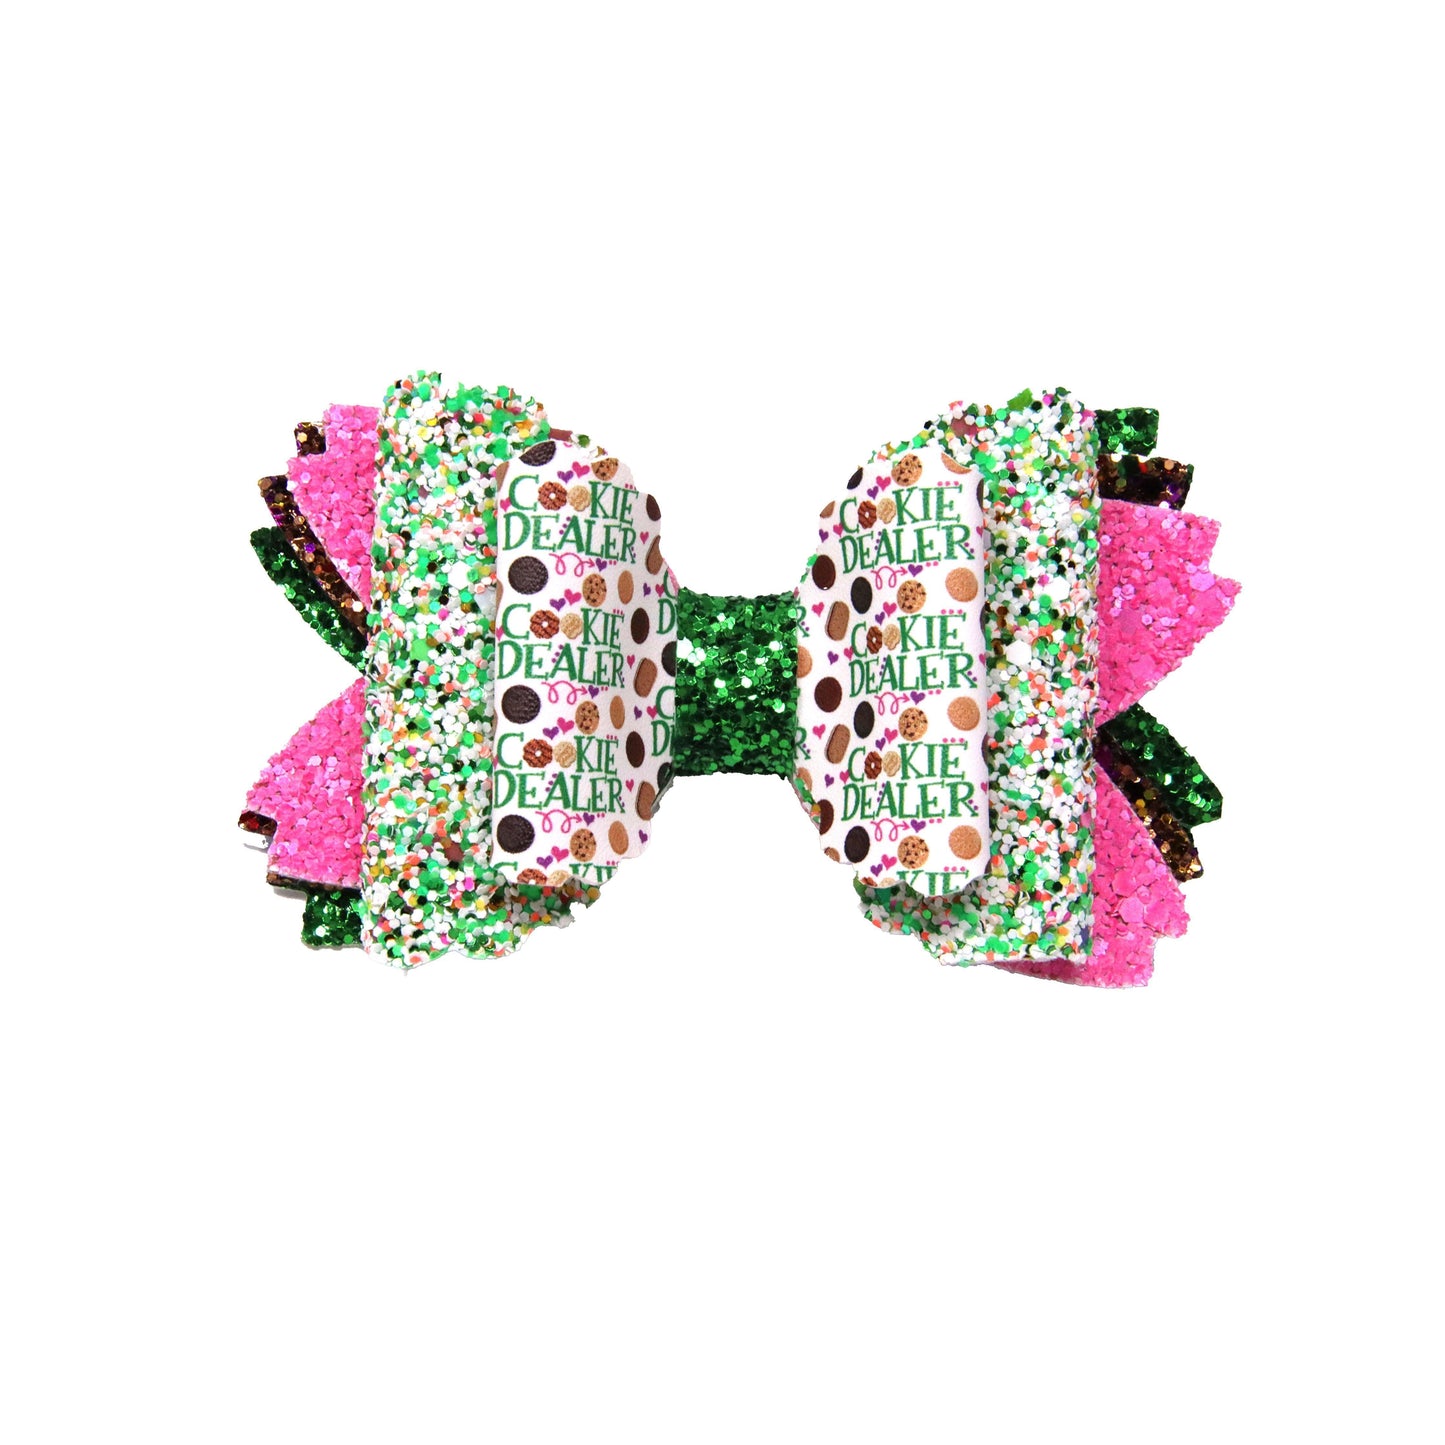 Cookie Dealer Double Scalloped Daisy Elite Bow 4"